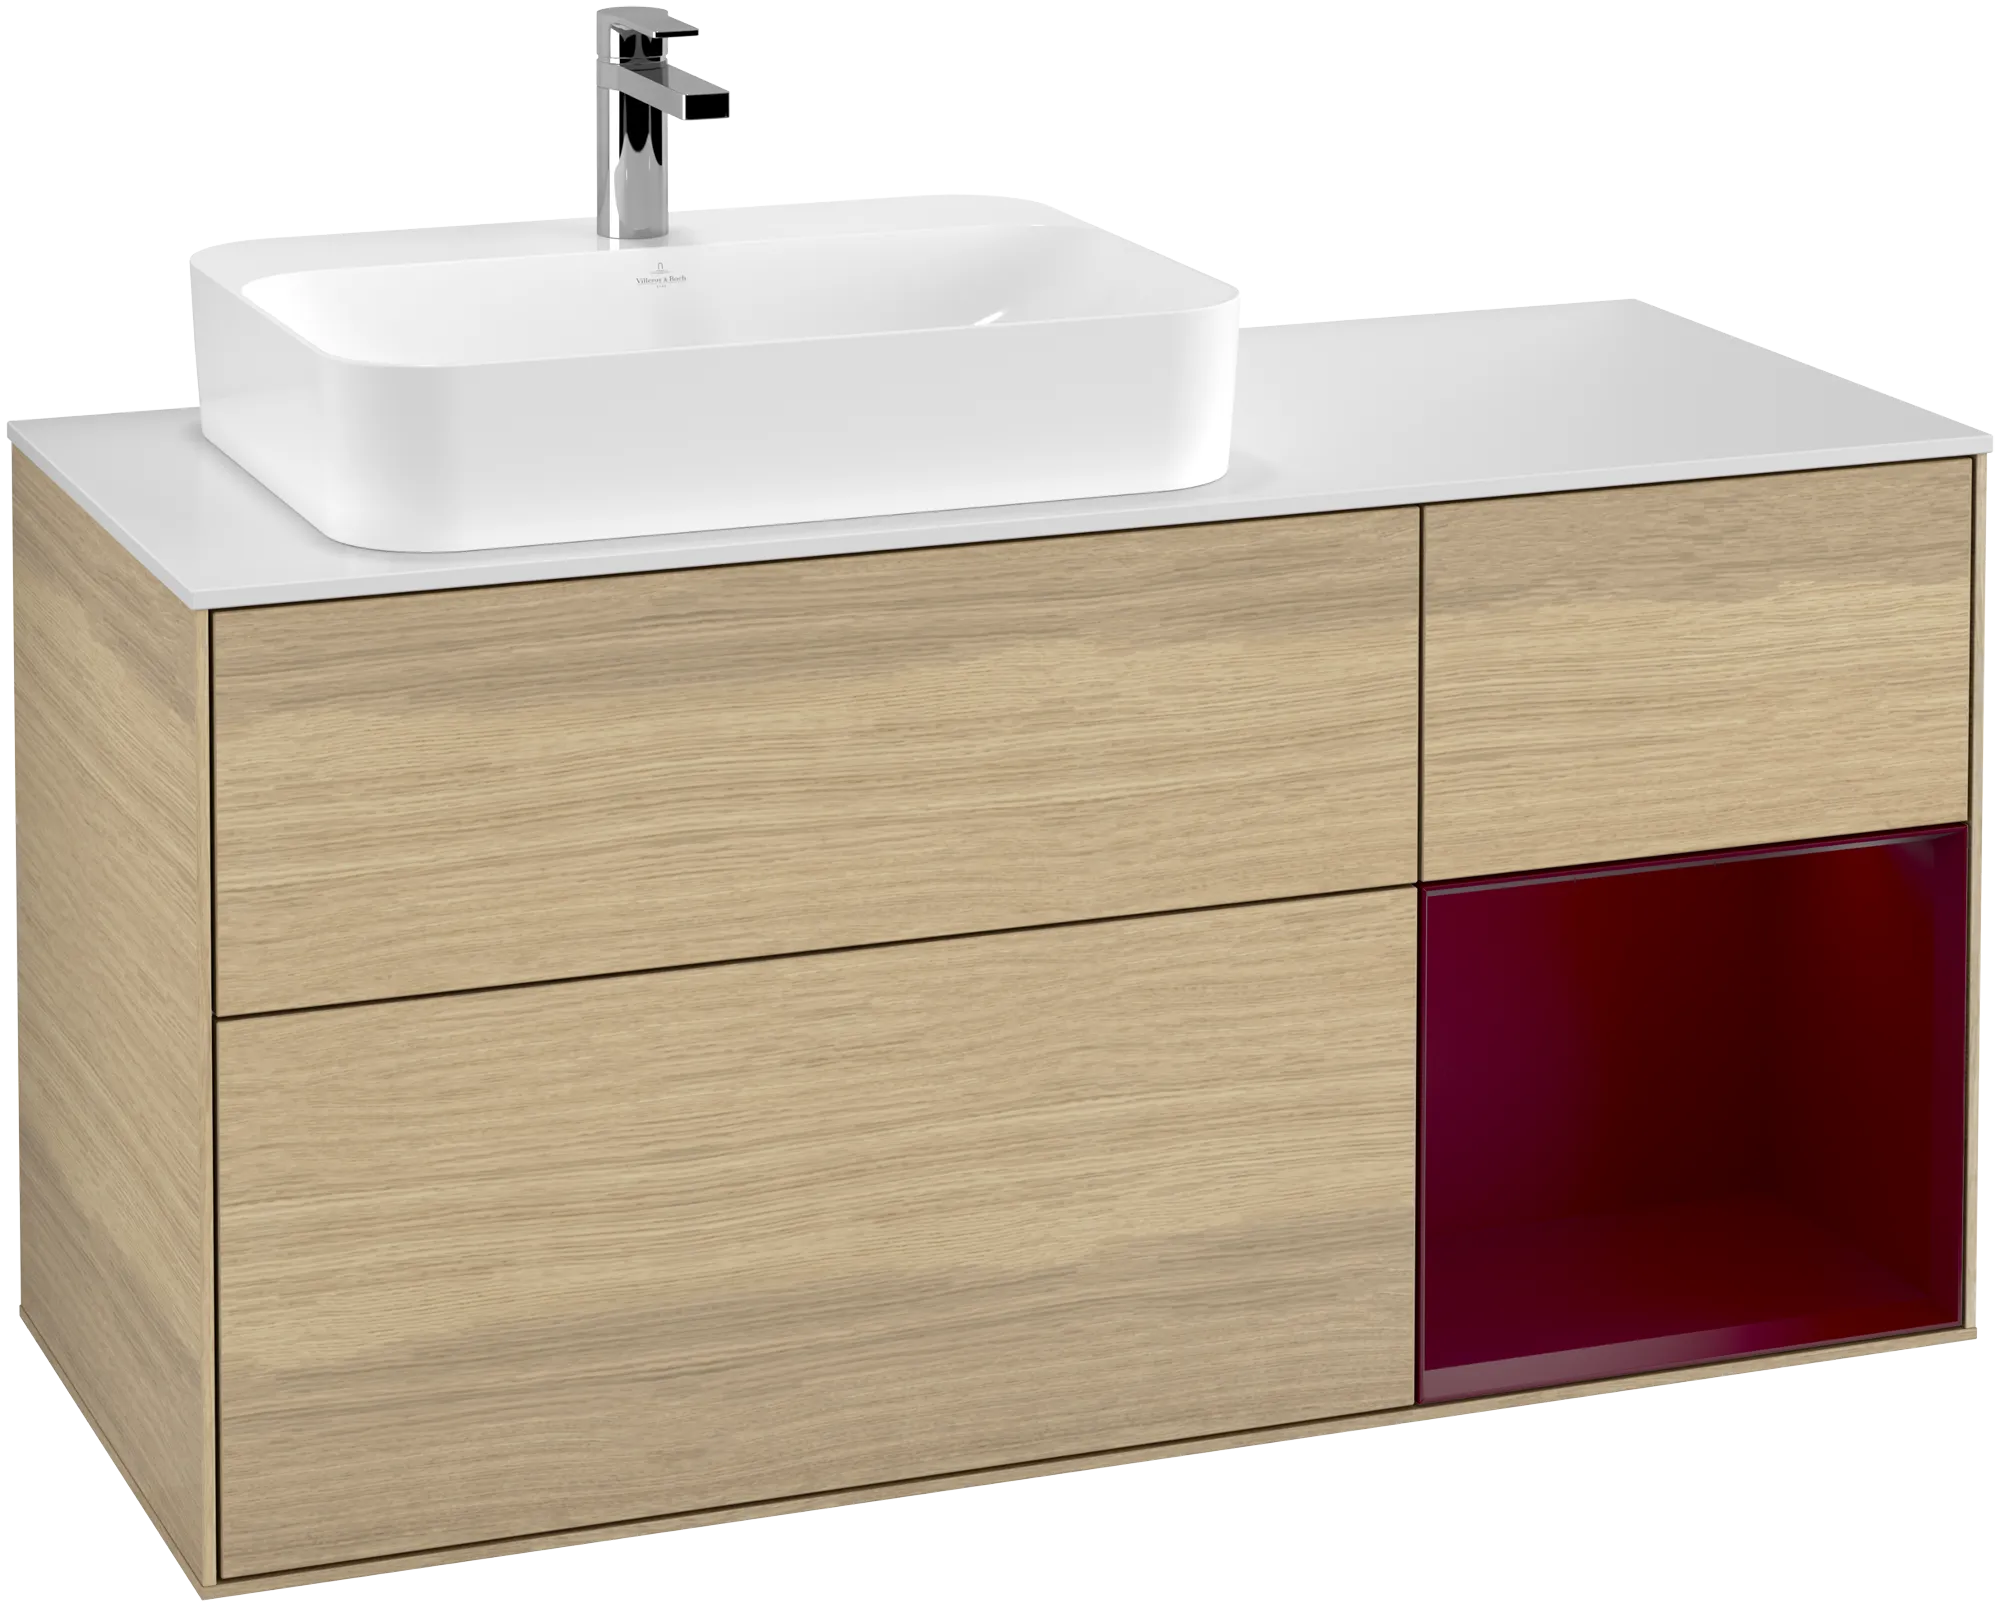 Picture of VILLEROY BOCH Finion Vanity unit, with lighting, 3 pull-out compartments, 1200 x 603 x 501 mm, Oak Veneer / Peony Matt Lacquer / Glass White Matt #G401HBPC